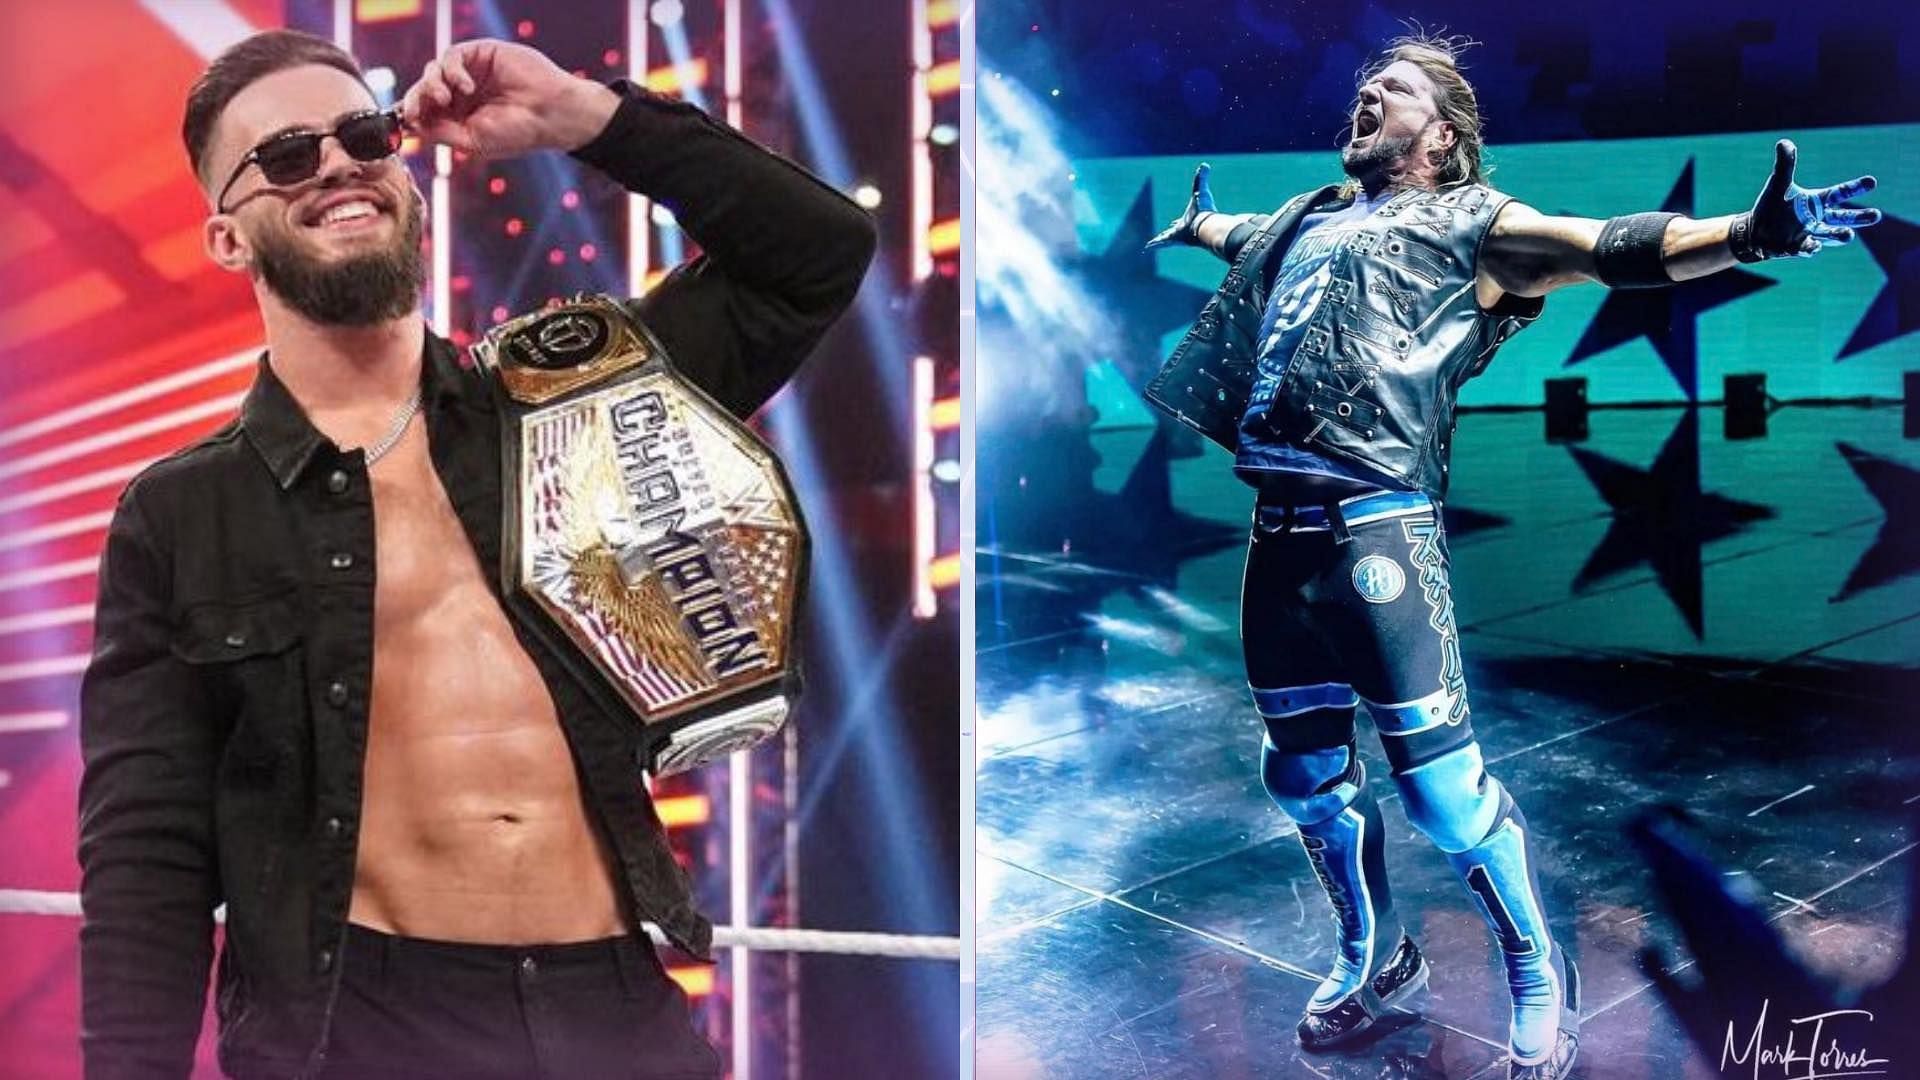 AJ Styles may return to action in WWE sooner rather than later